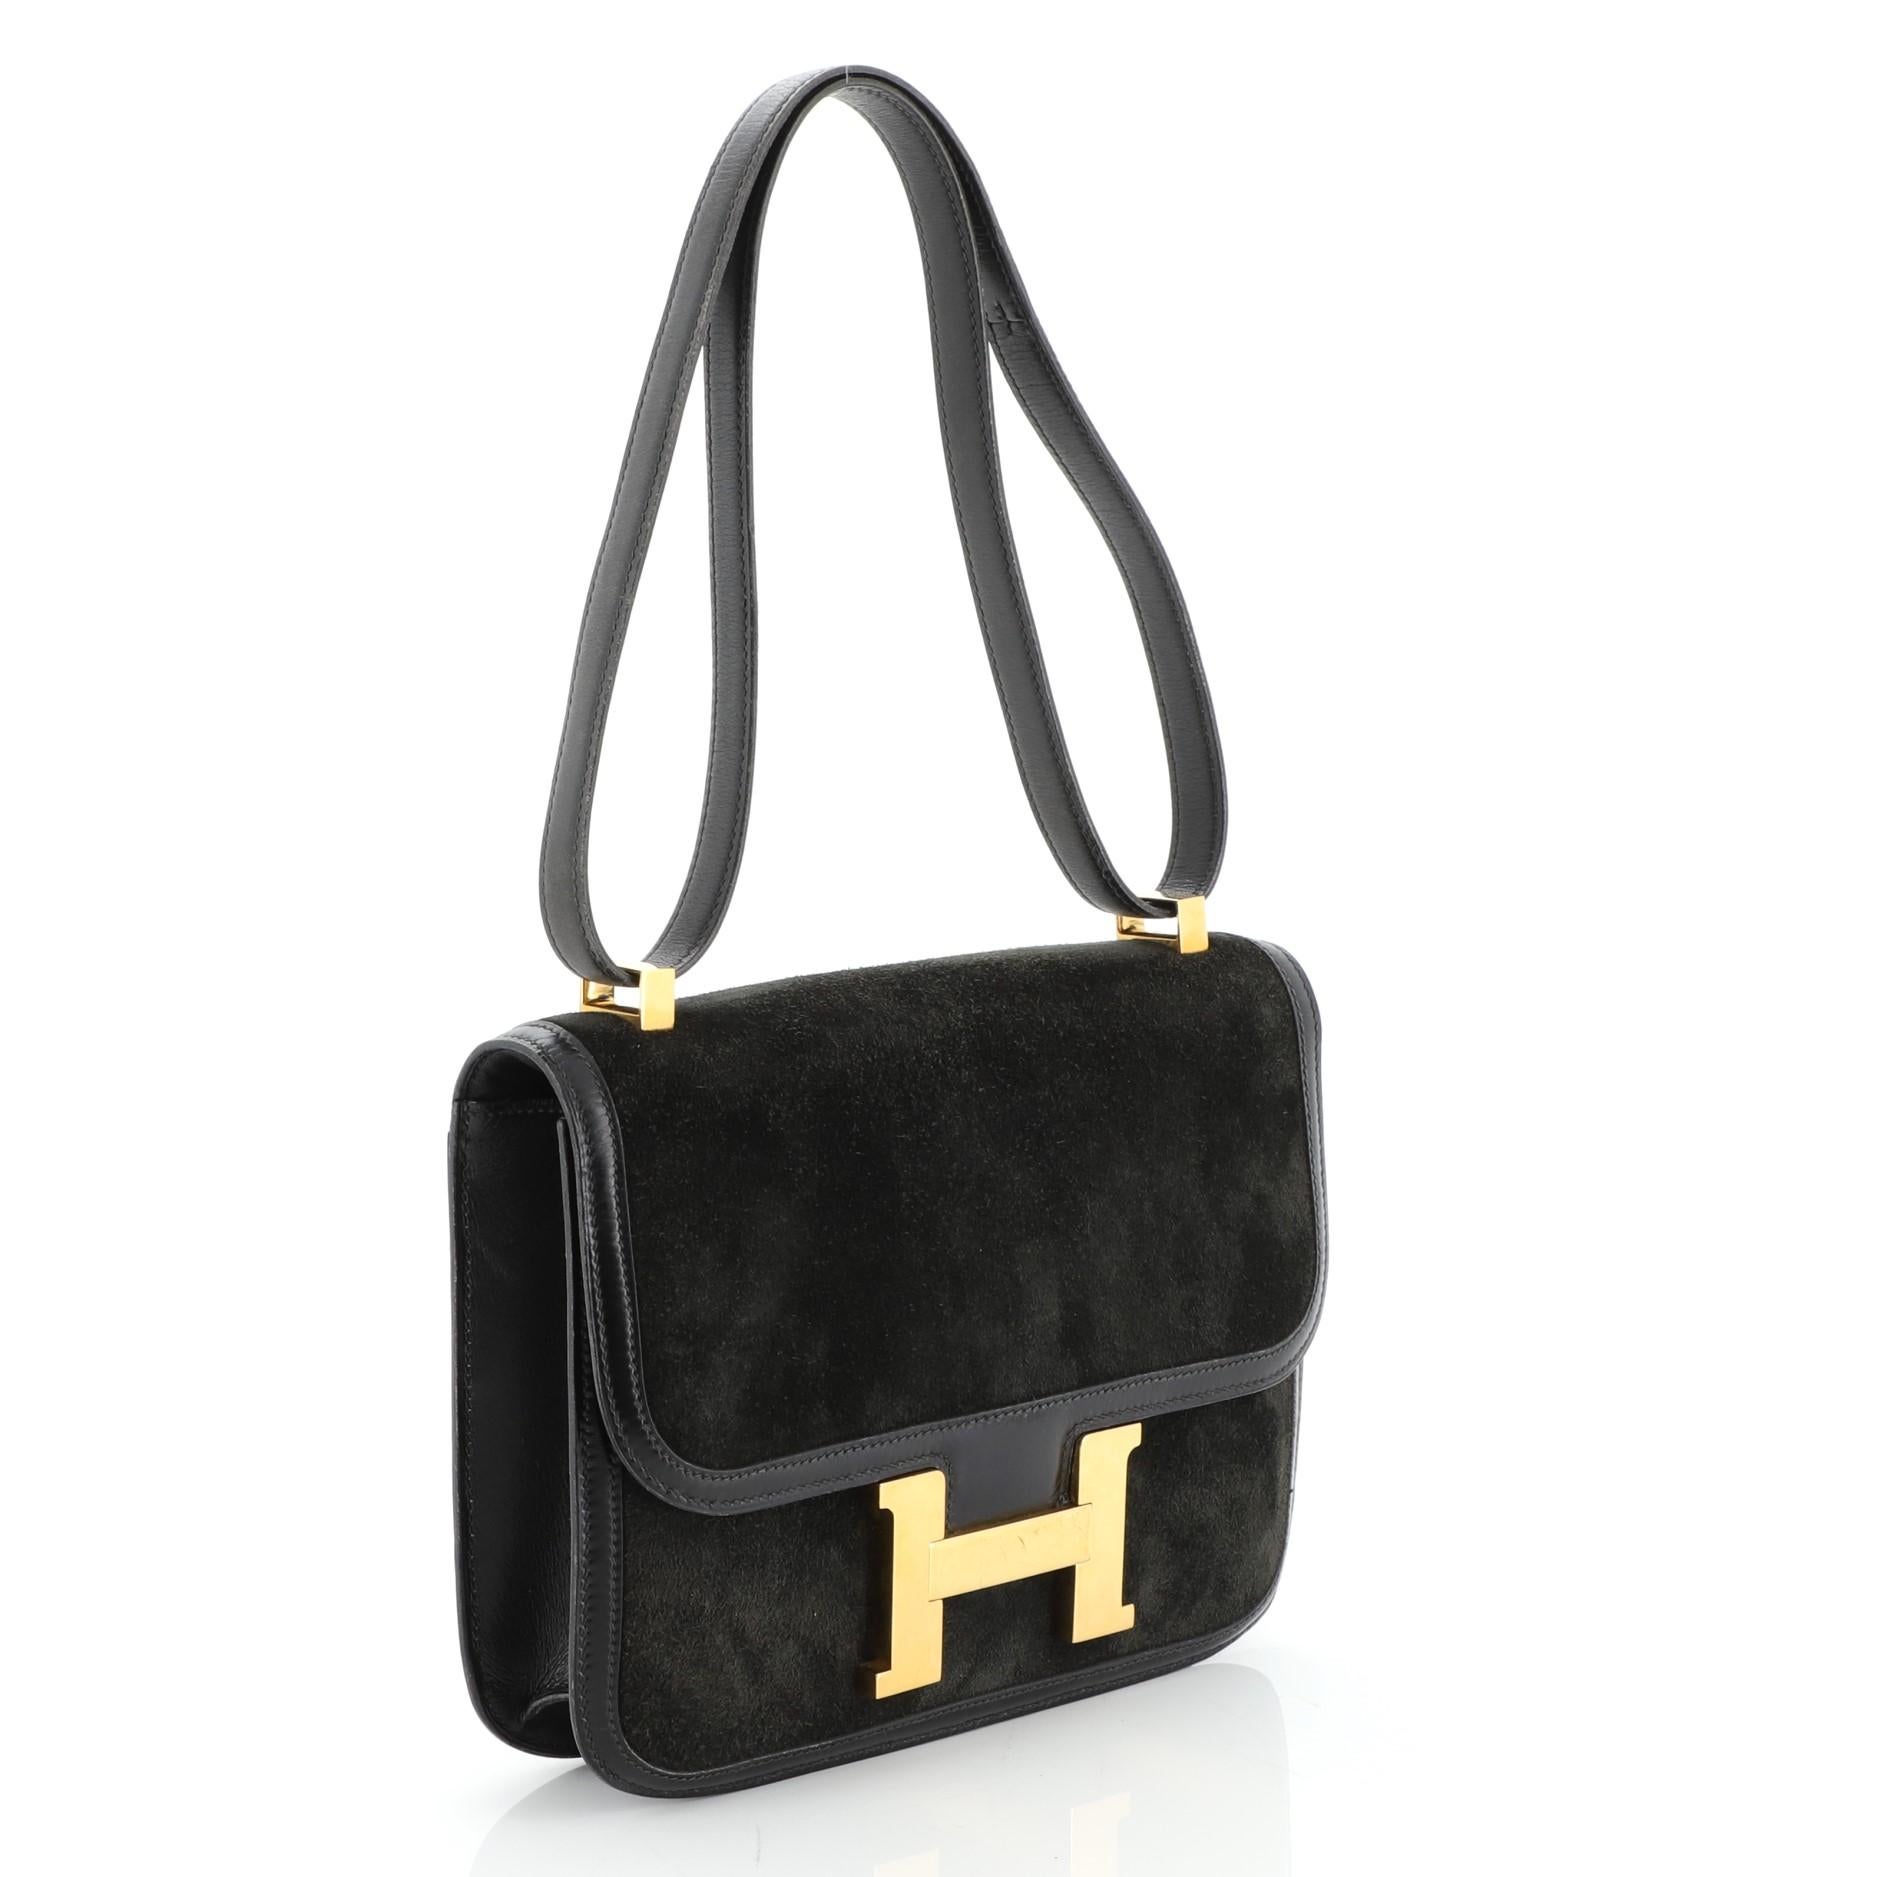 This Hermes Constance Bag Doblis Suede with Box Calf 24, crafted from Noir black Veau Doblis and Box Calf leather, features a long leather strap and gold hardware. Its push-lock closure opens to a Noir black Agneau leather interior divided into two